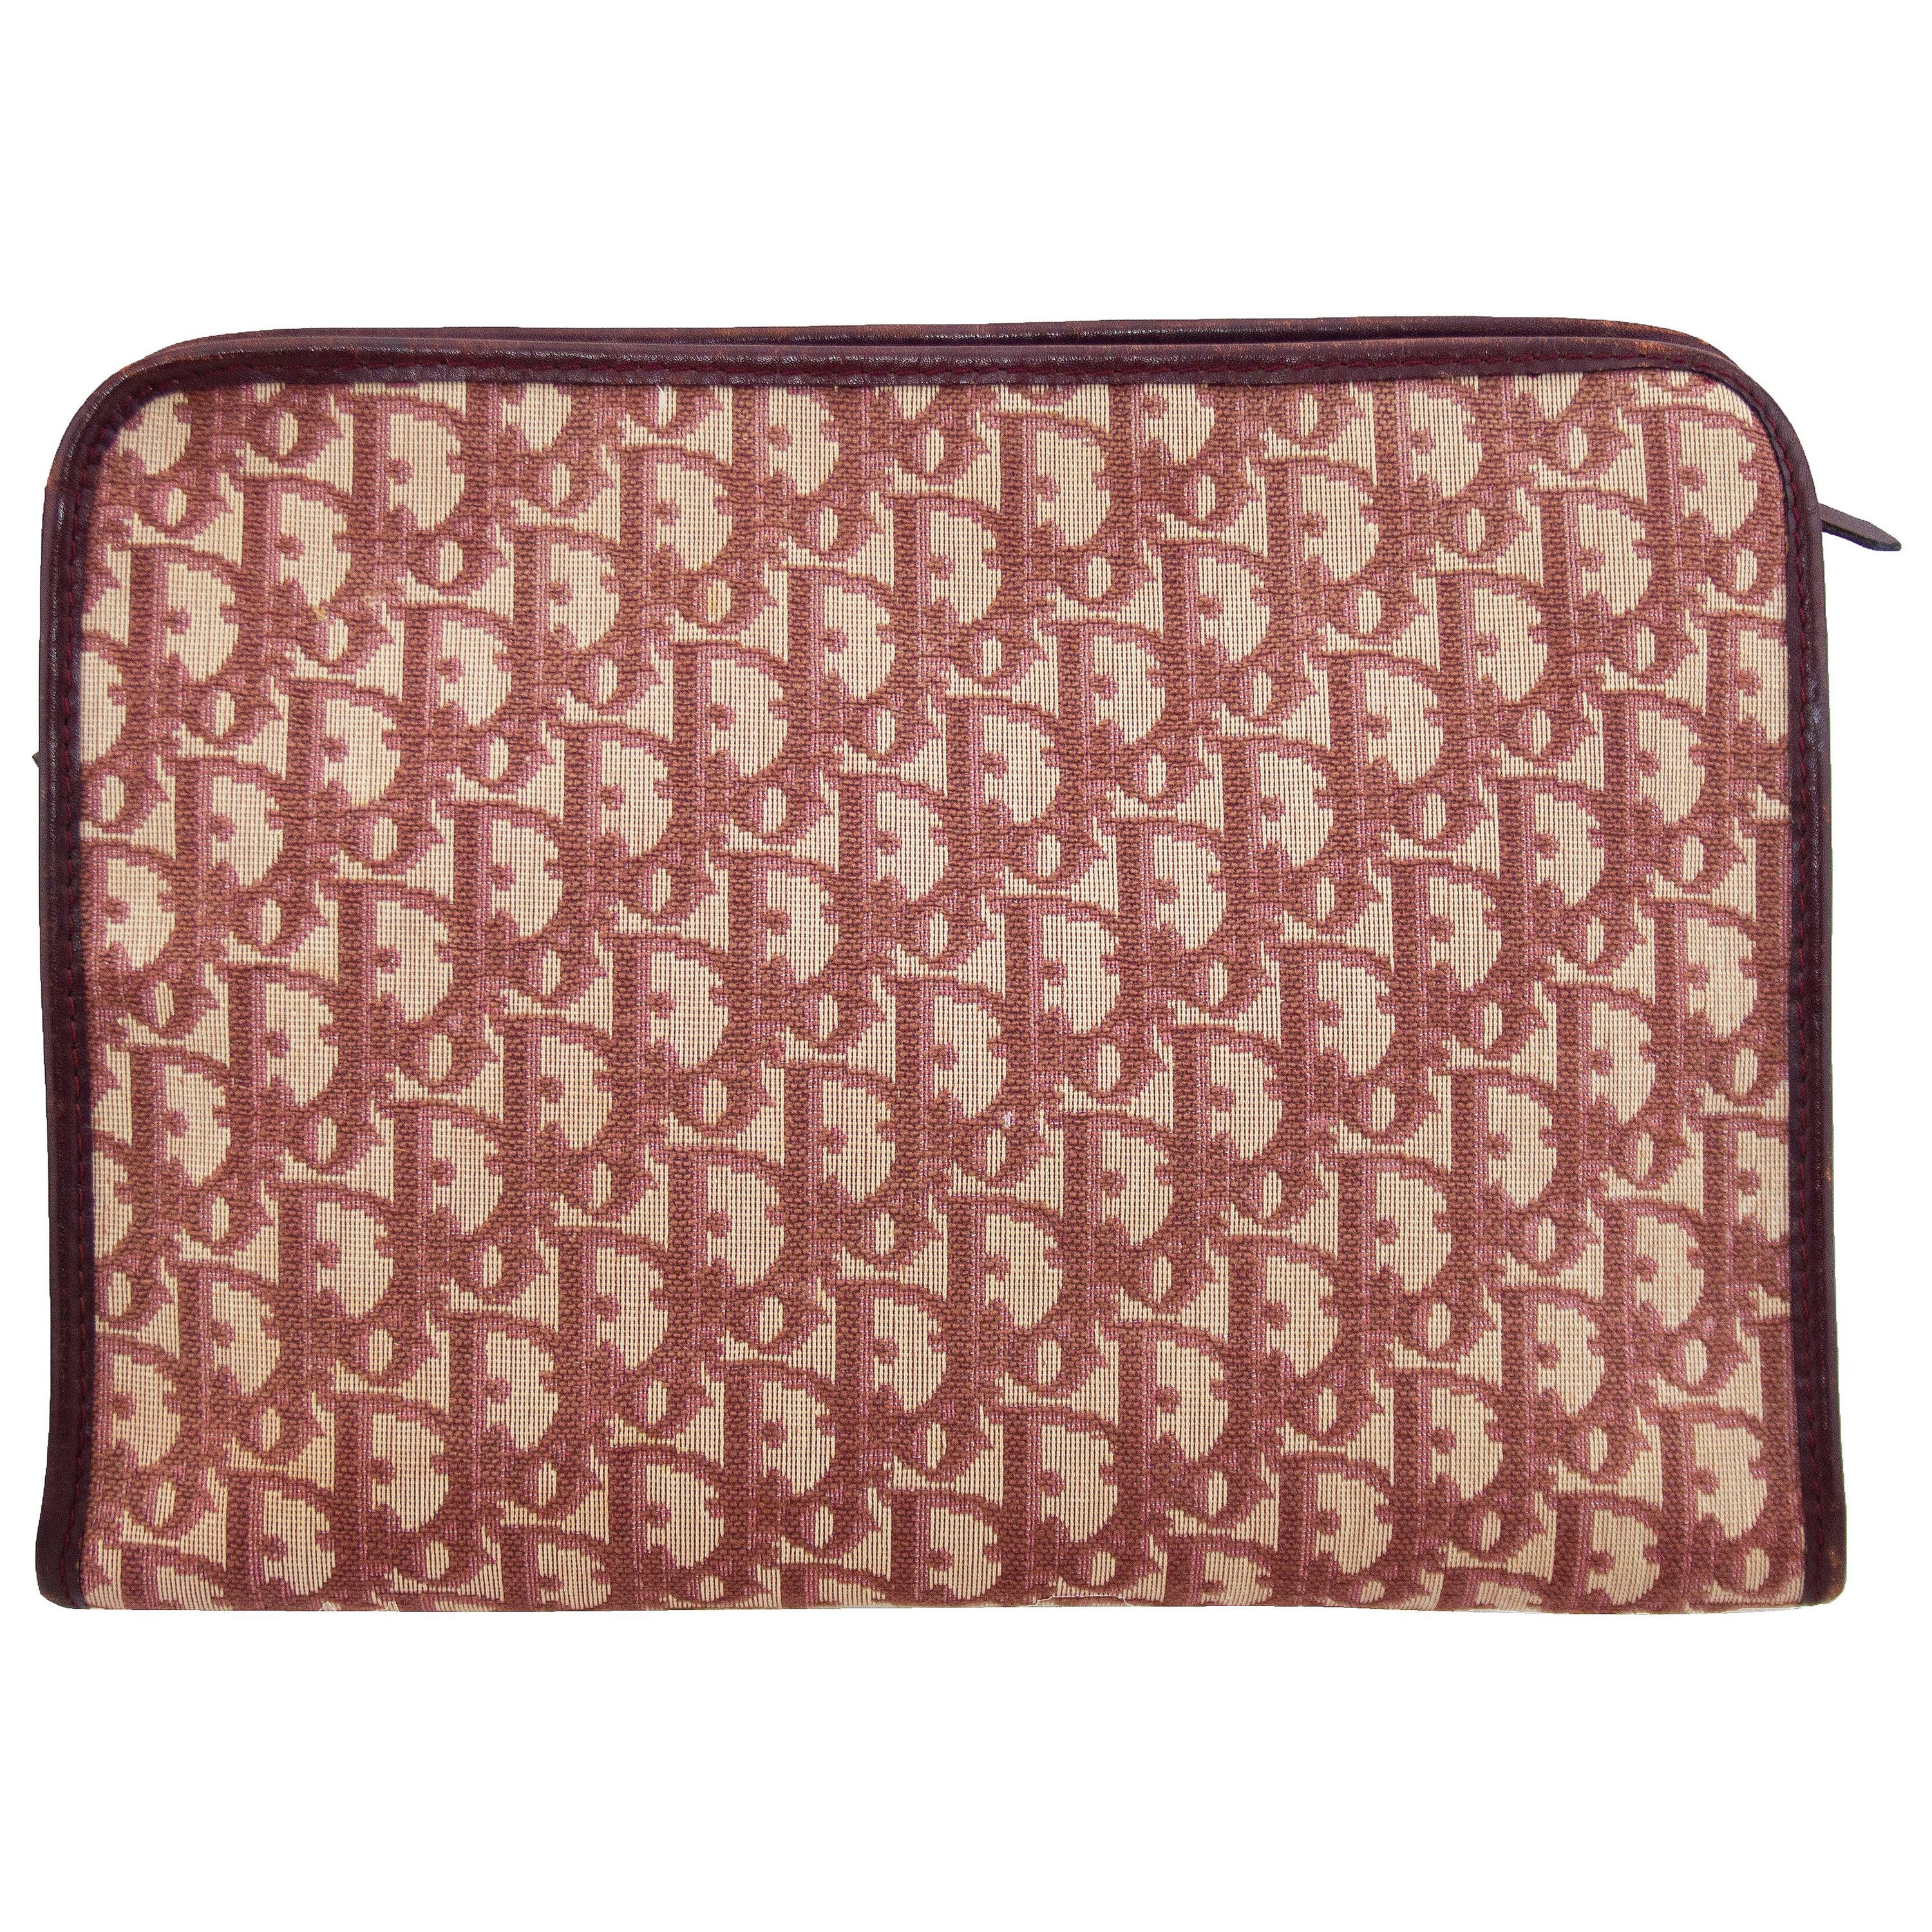 1970s Christian Dior Red Monogram Canvas Cosmetic Bag/Clutch 